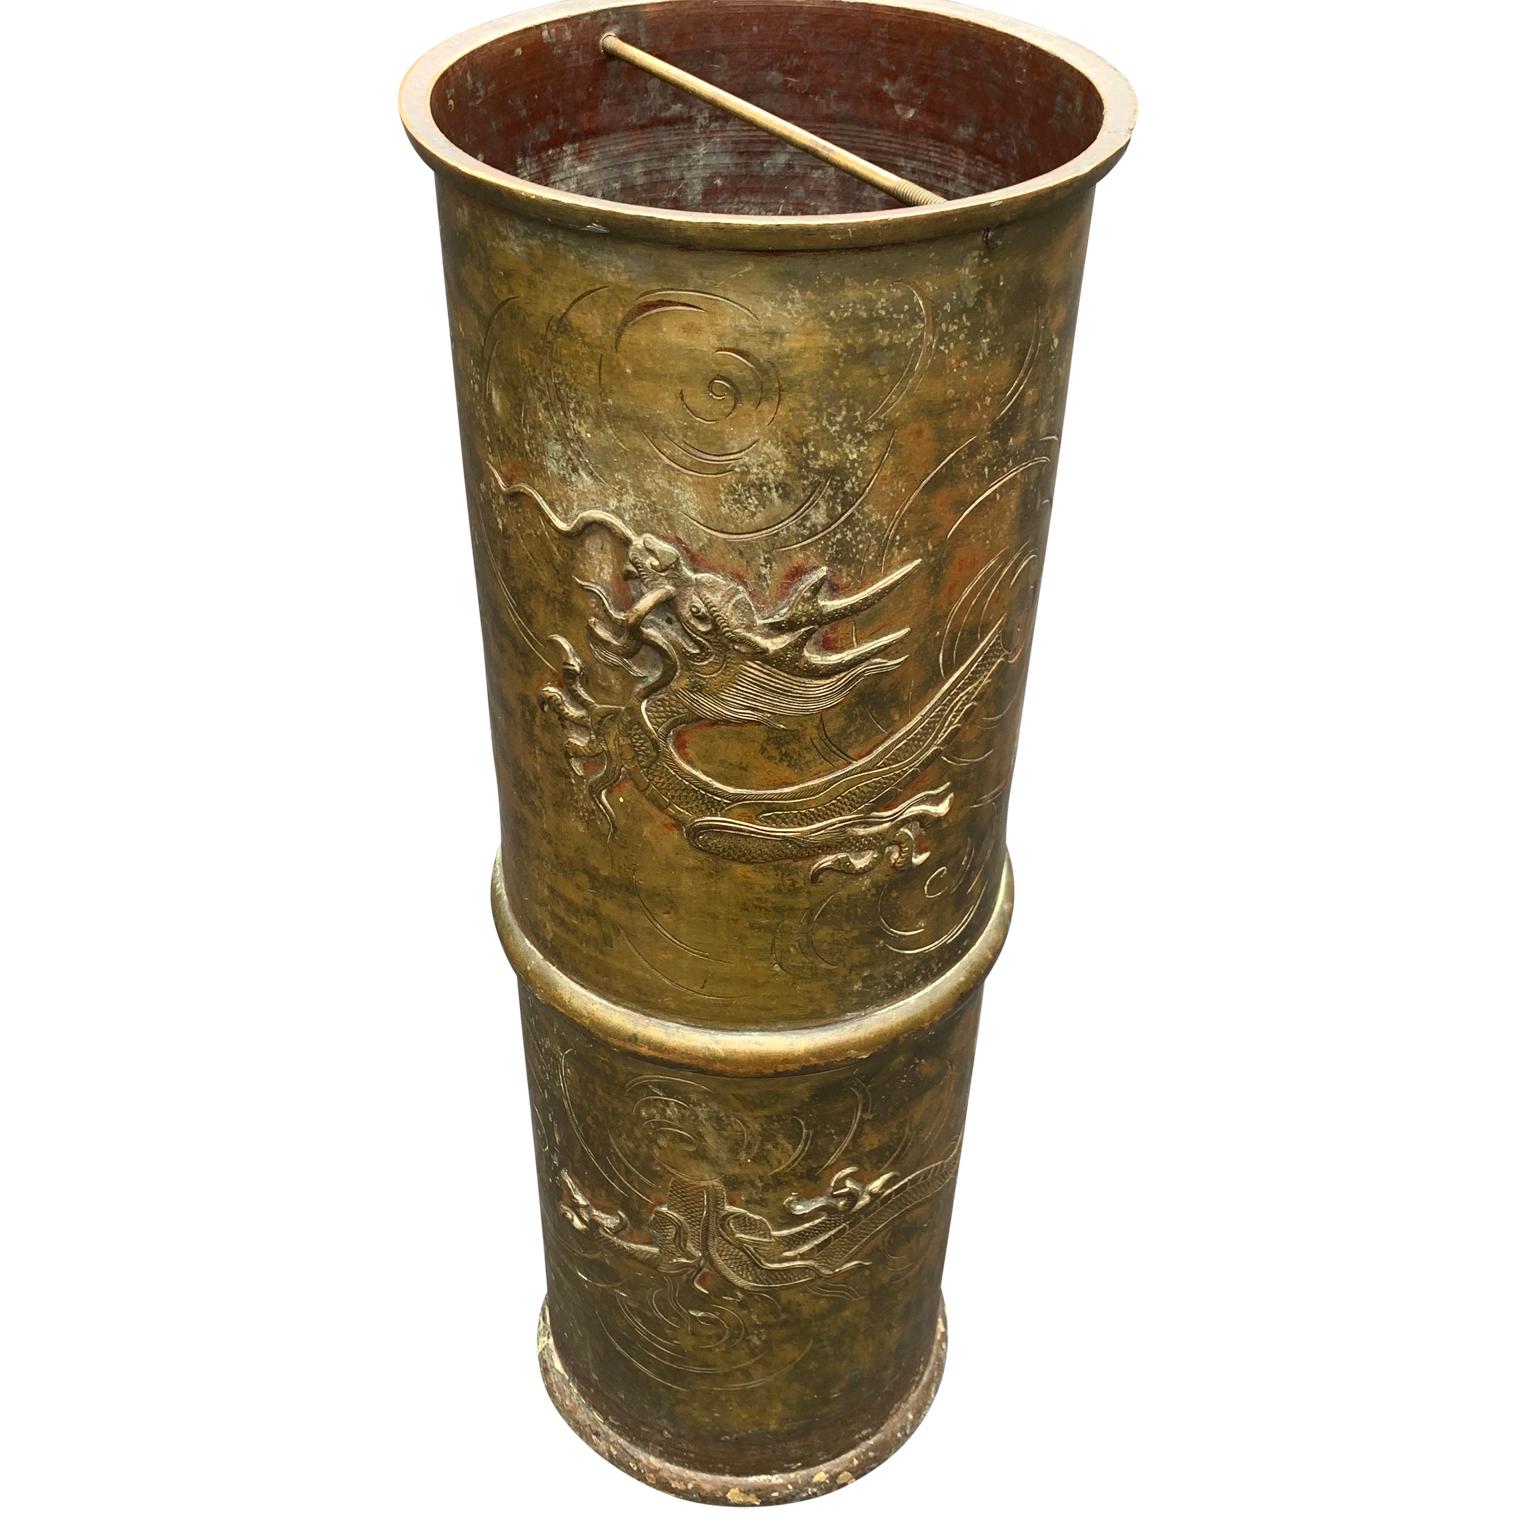 Late 19th Century Chinese Bronze Umbrella Stand with Dragon Decoration